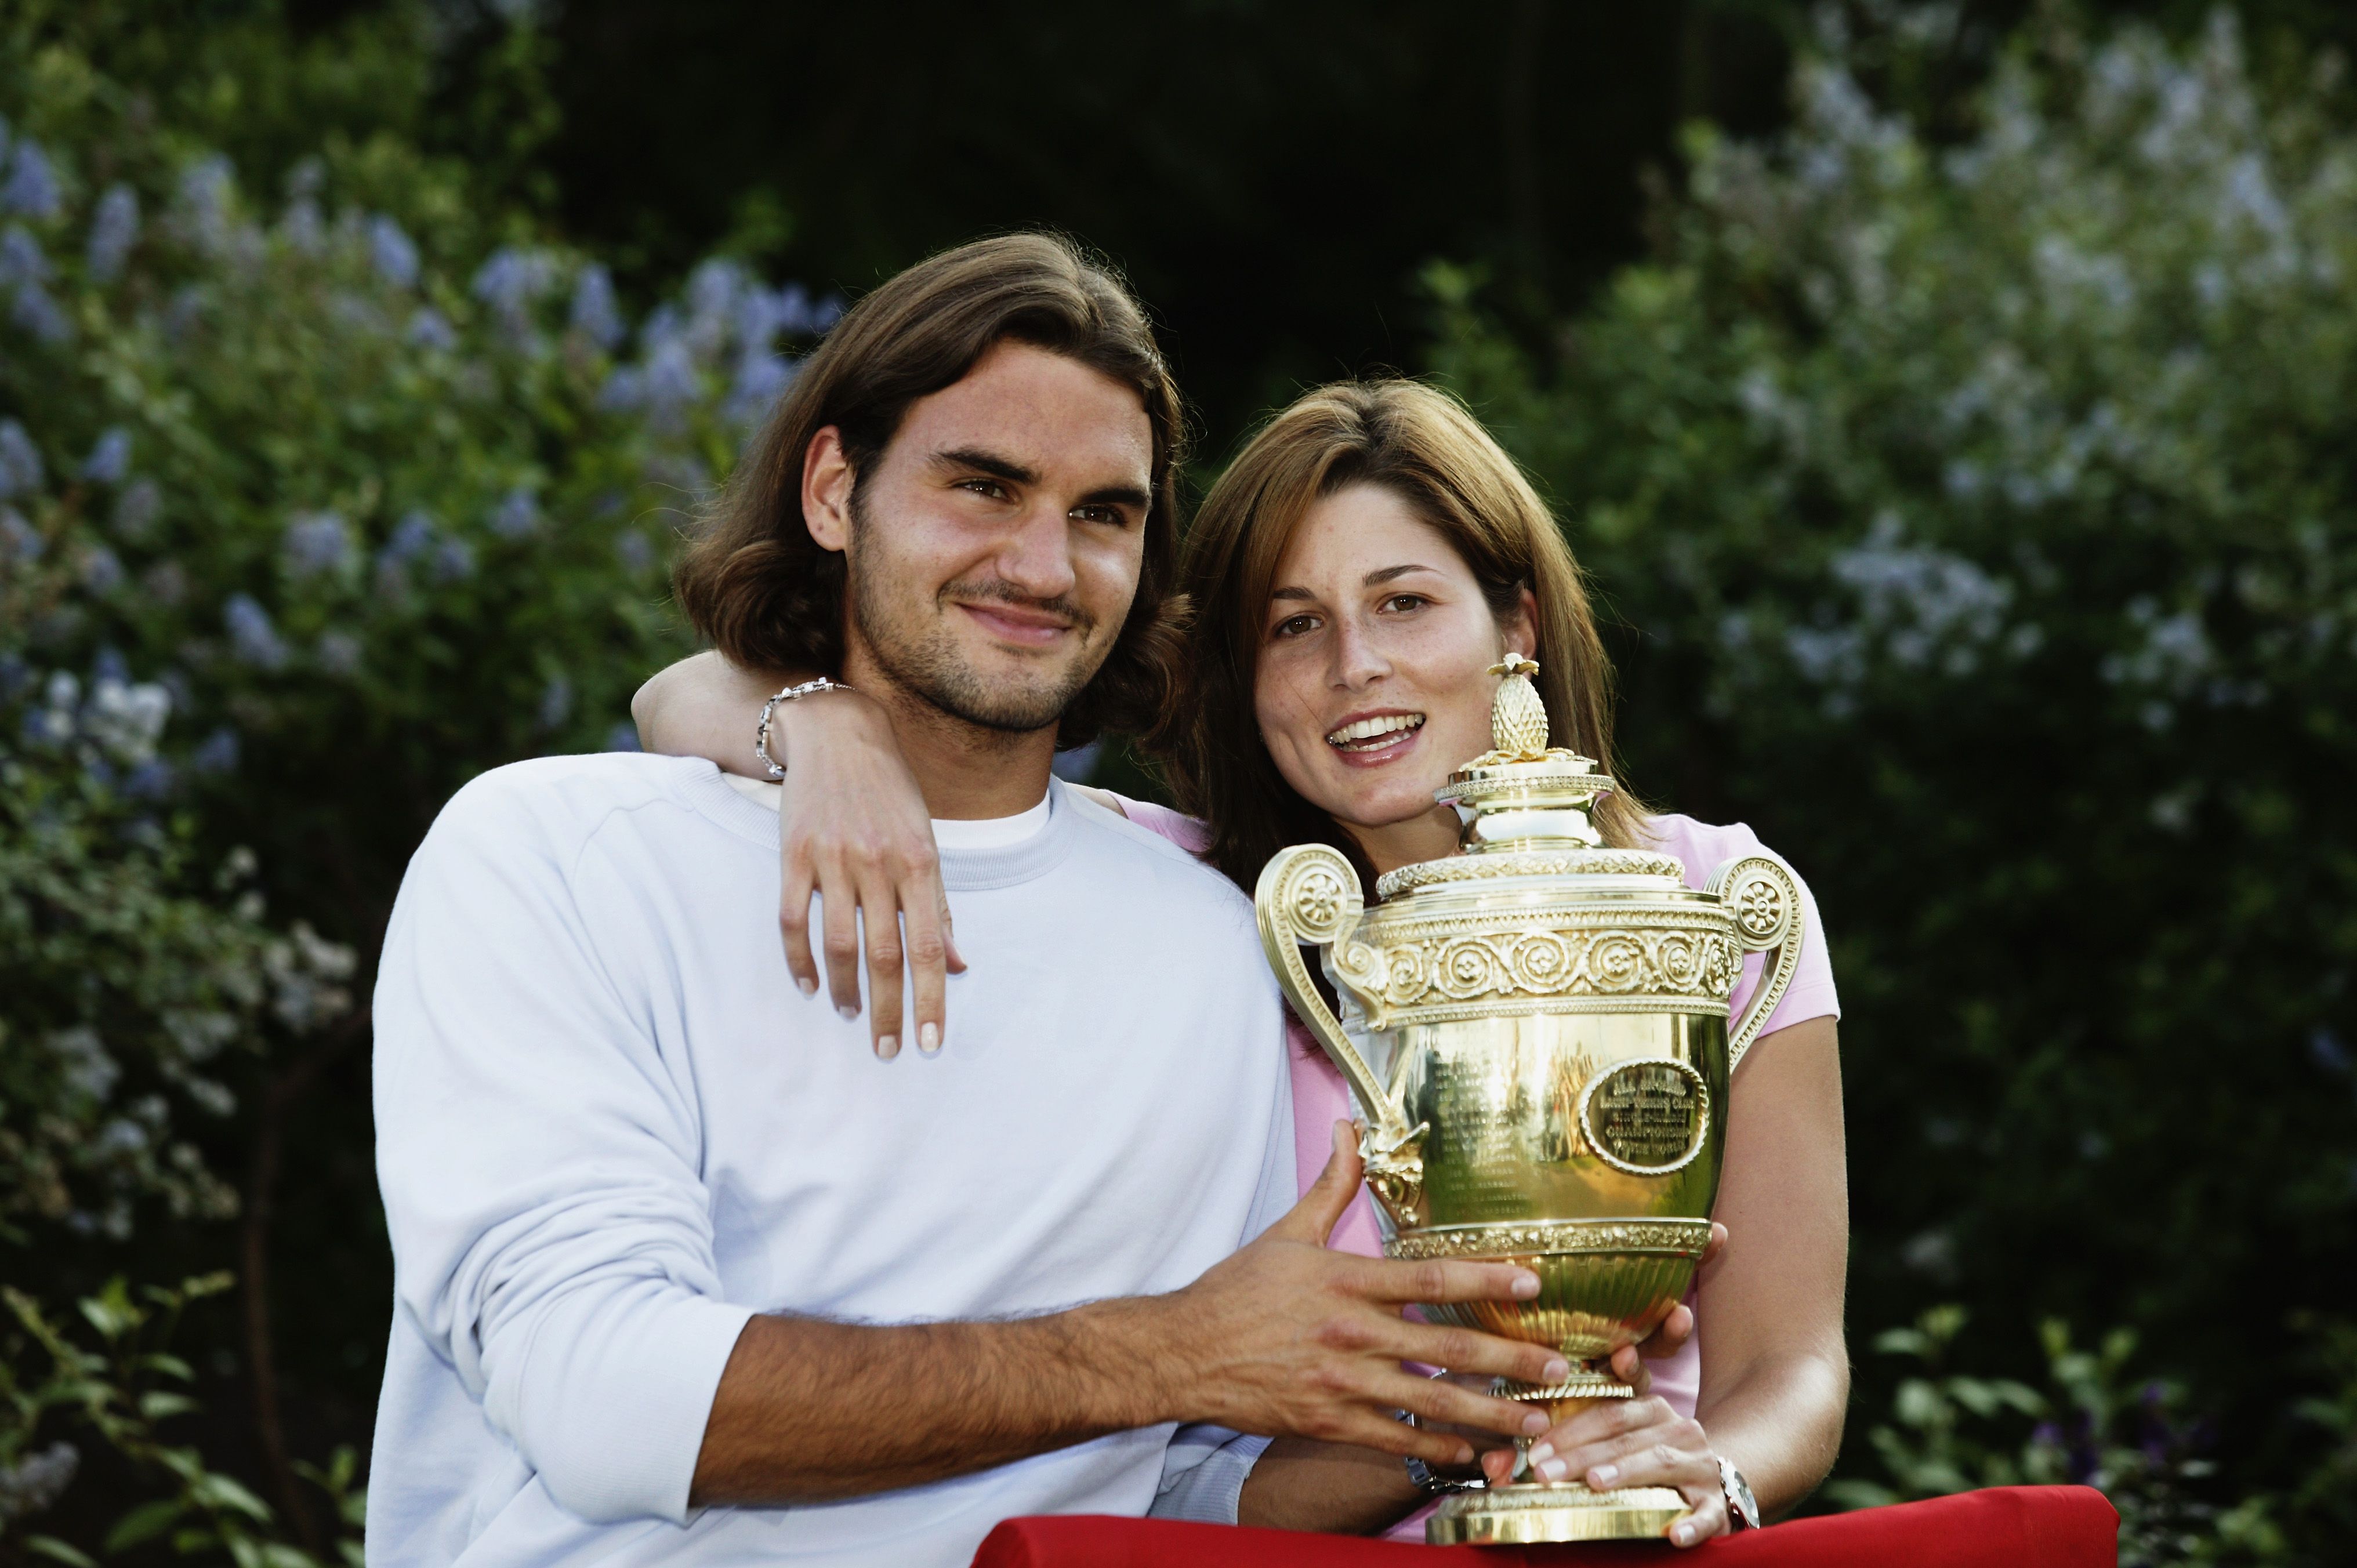 Roger Federer and Mirka Federer after his victory at the Wimbledon Lawn Tennis Championships in 2003 in London | Source: Getty Images